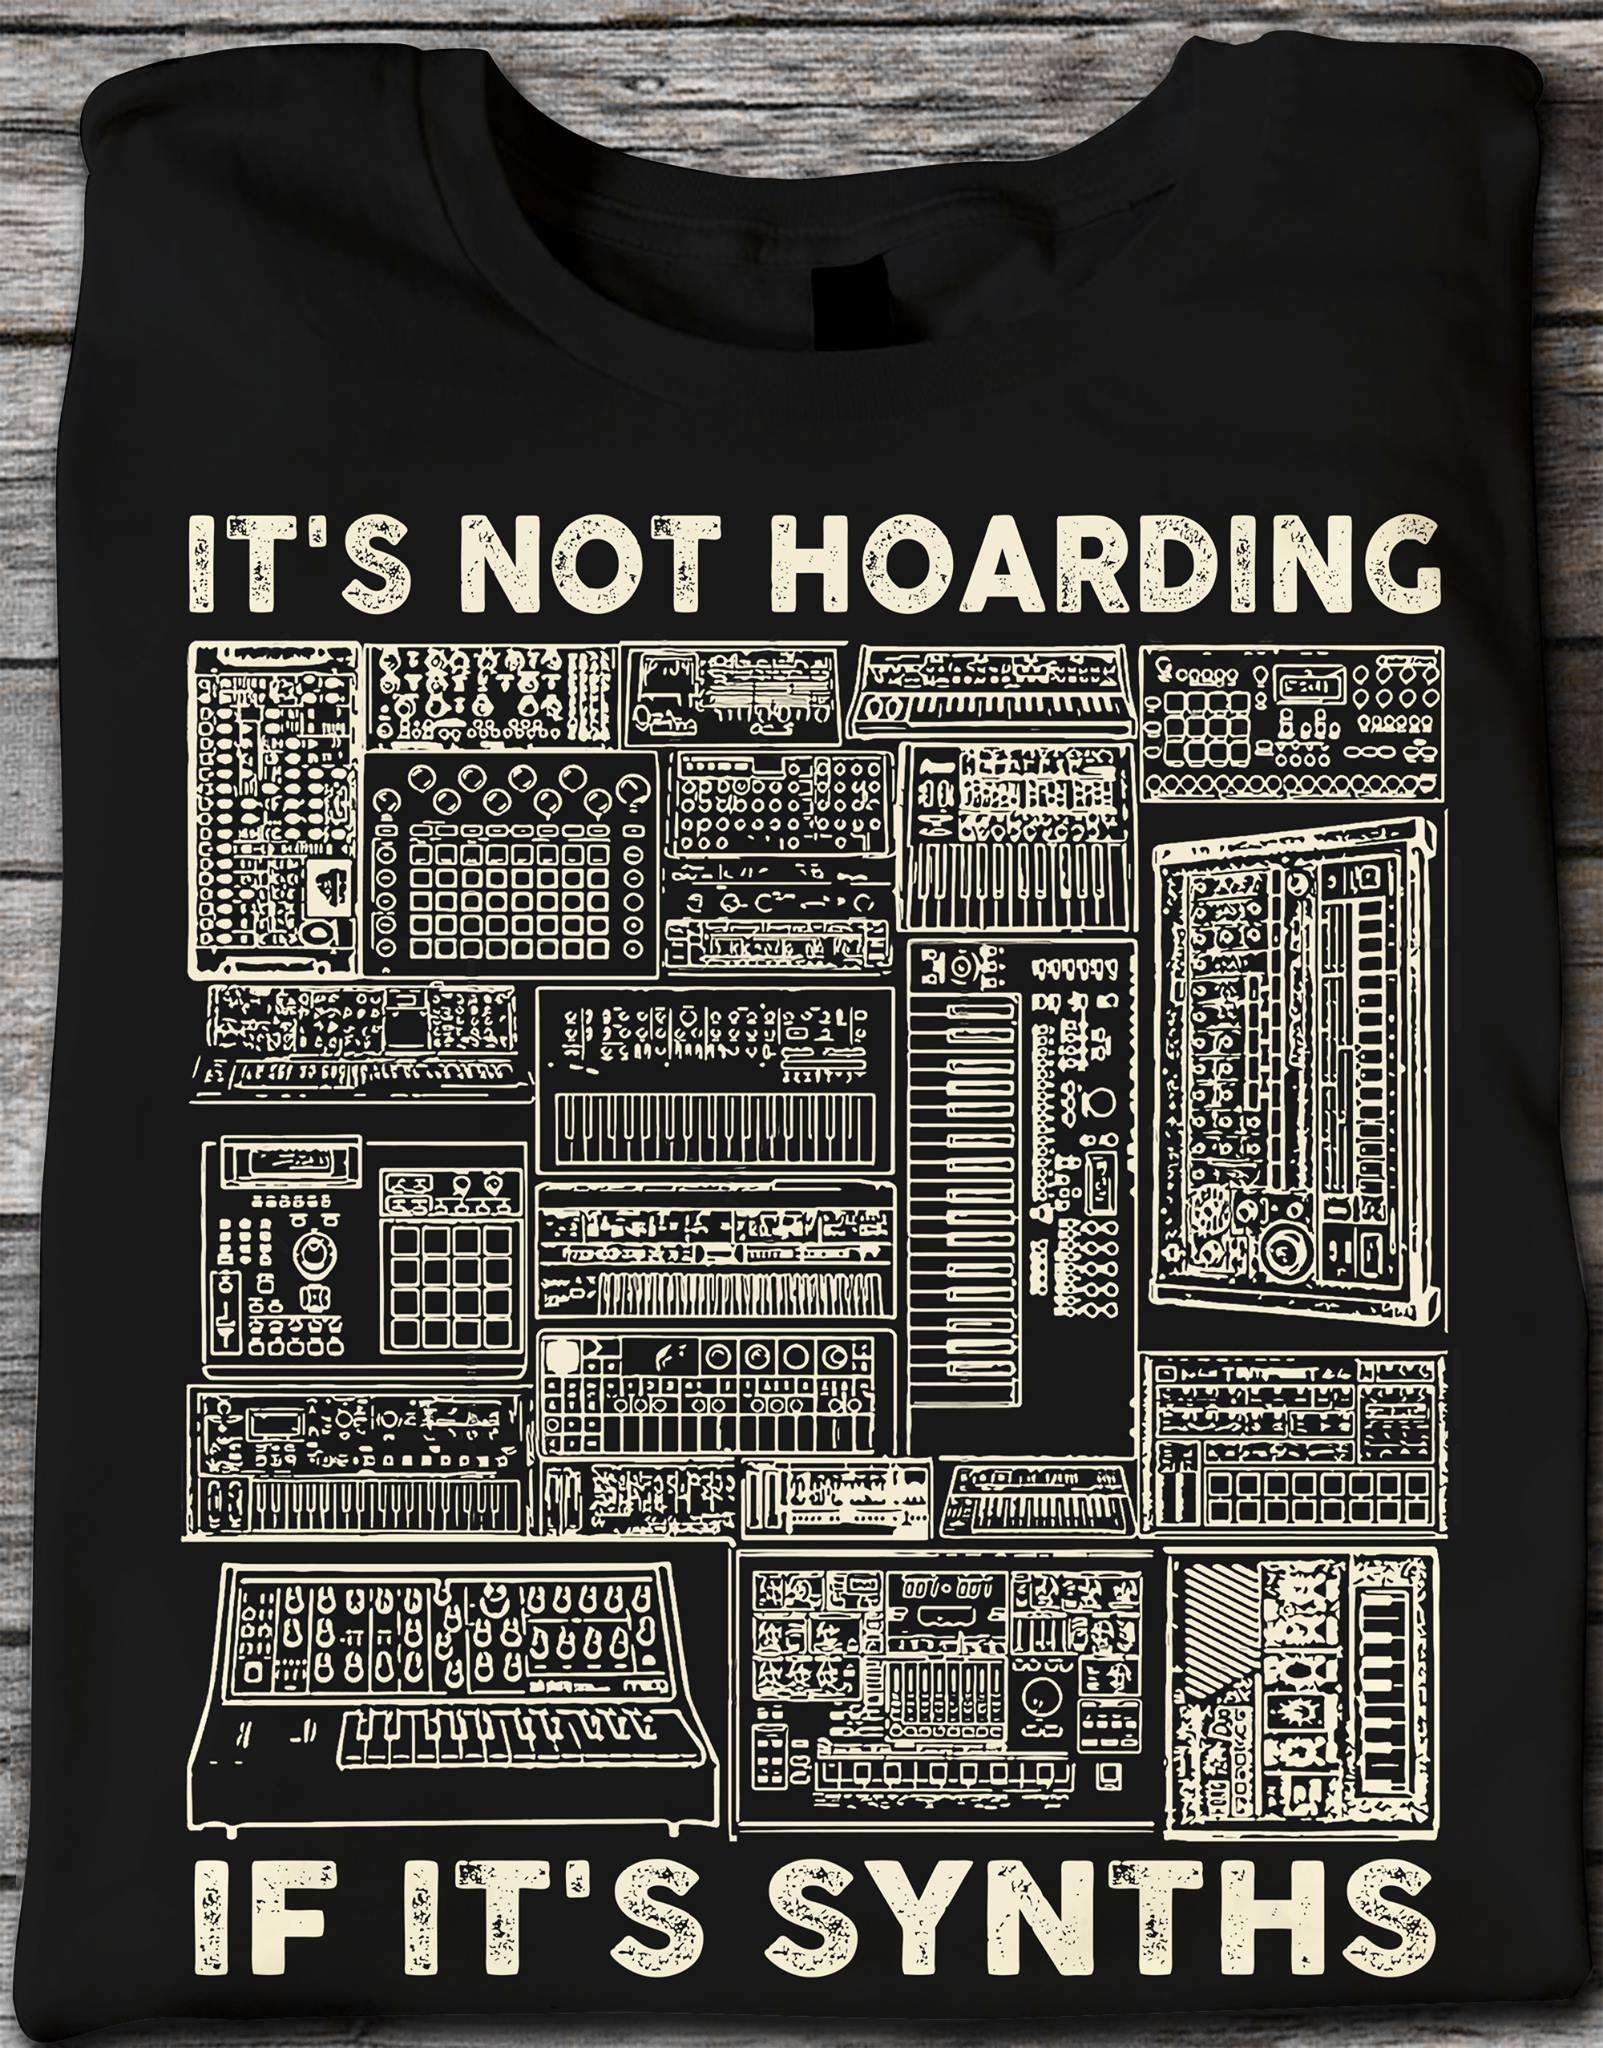 Synth the instrument, synth music playing - It's not hoarding if it's synths